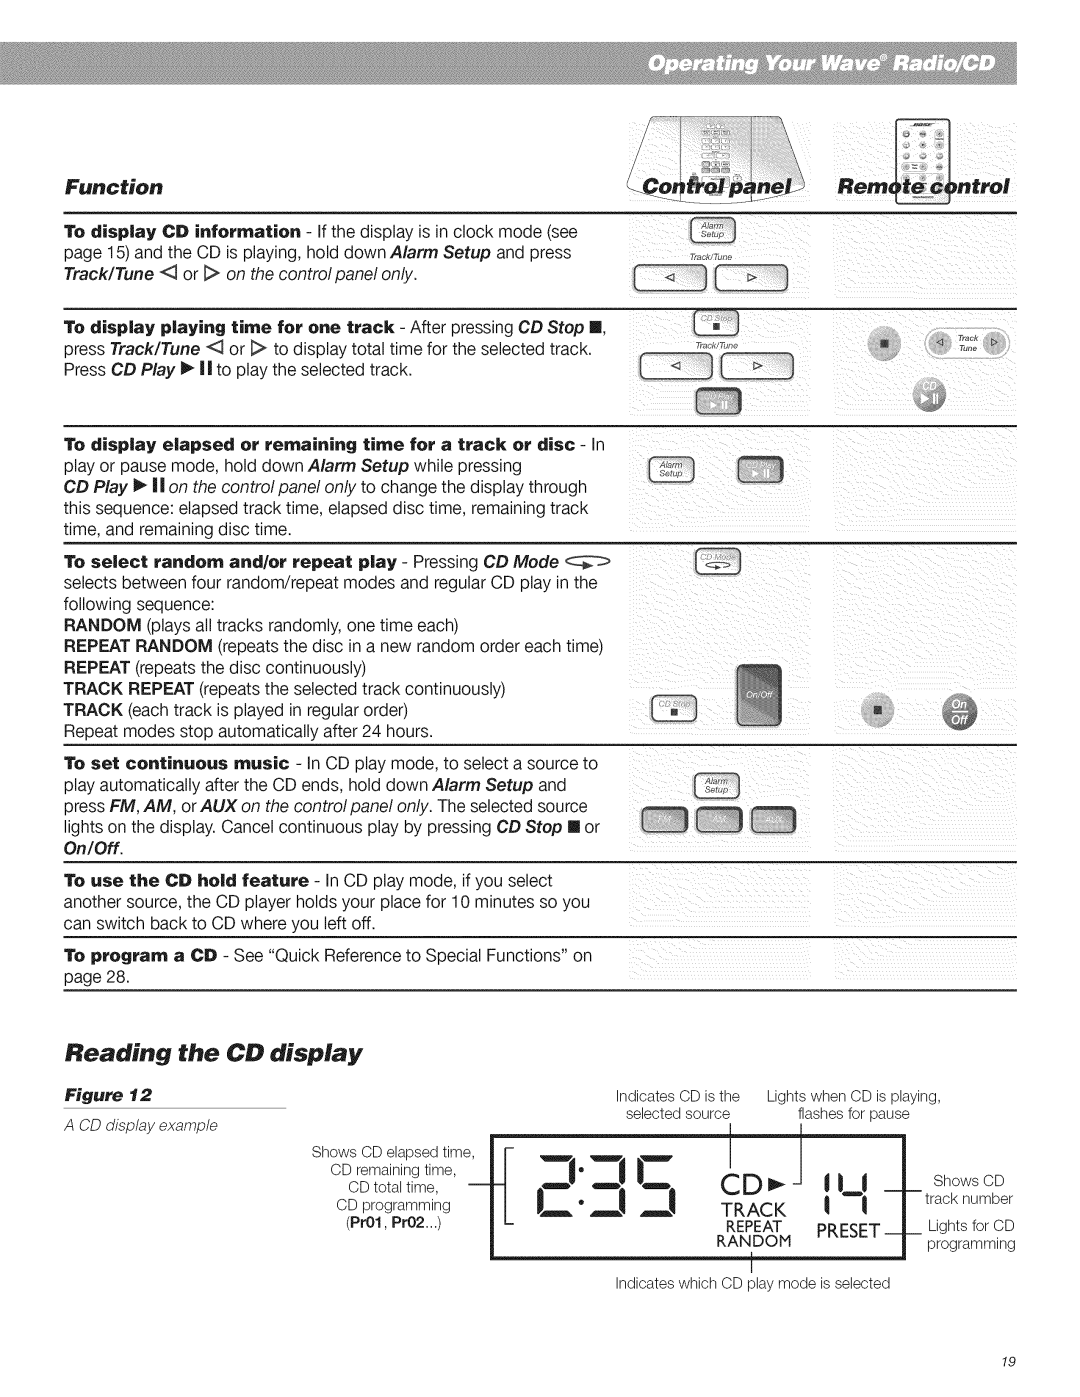 Bose CD Player manual Reading the CD display, Function 